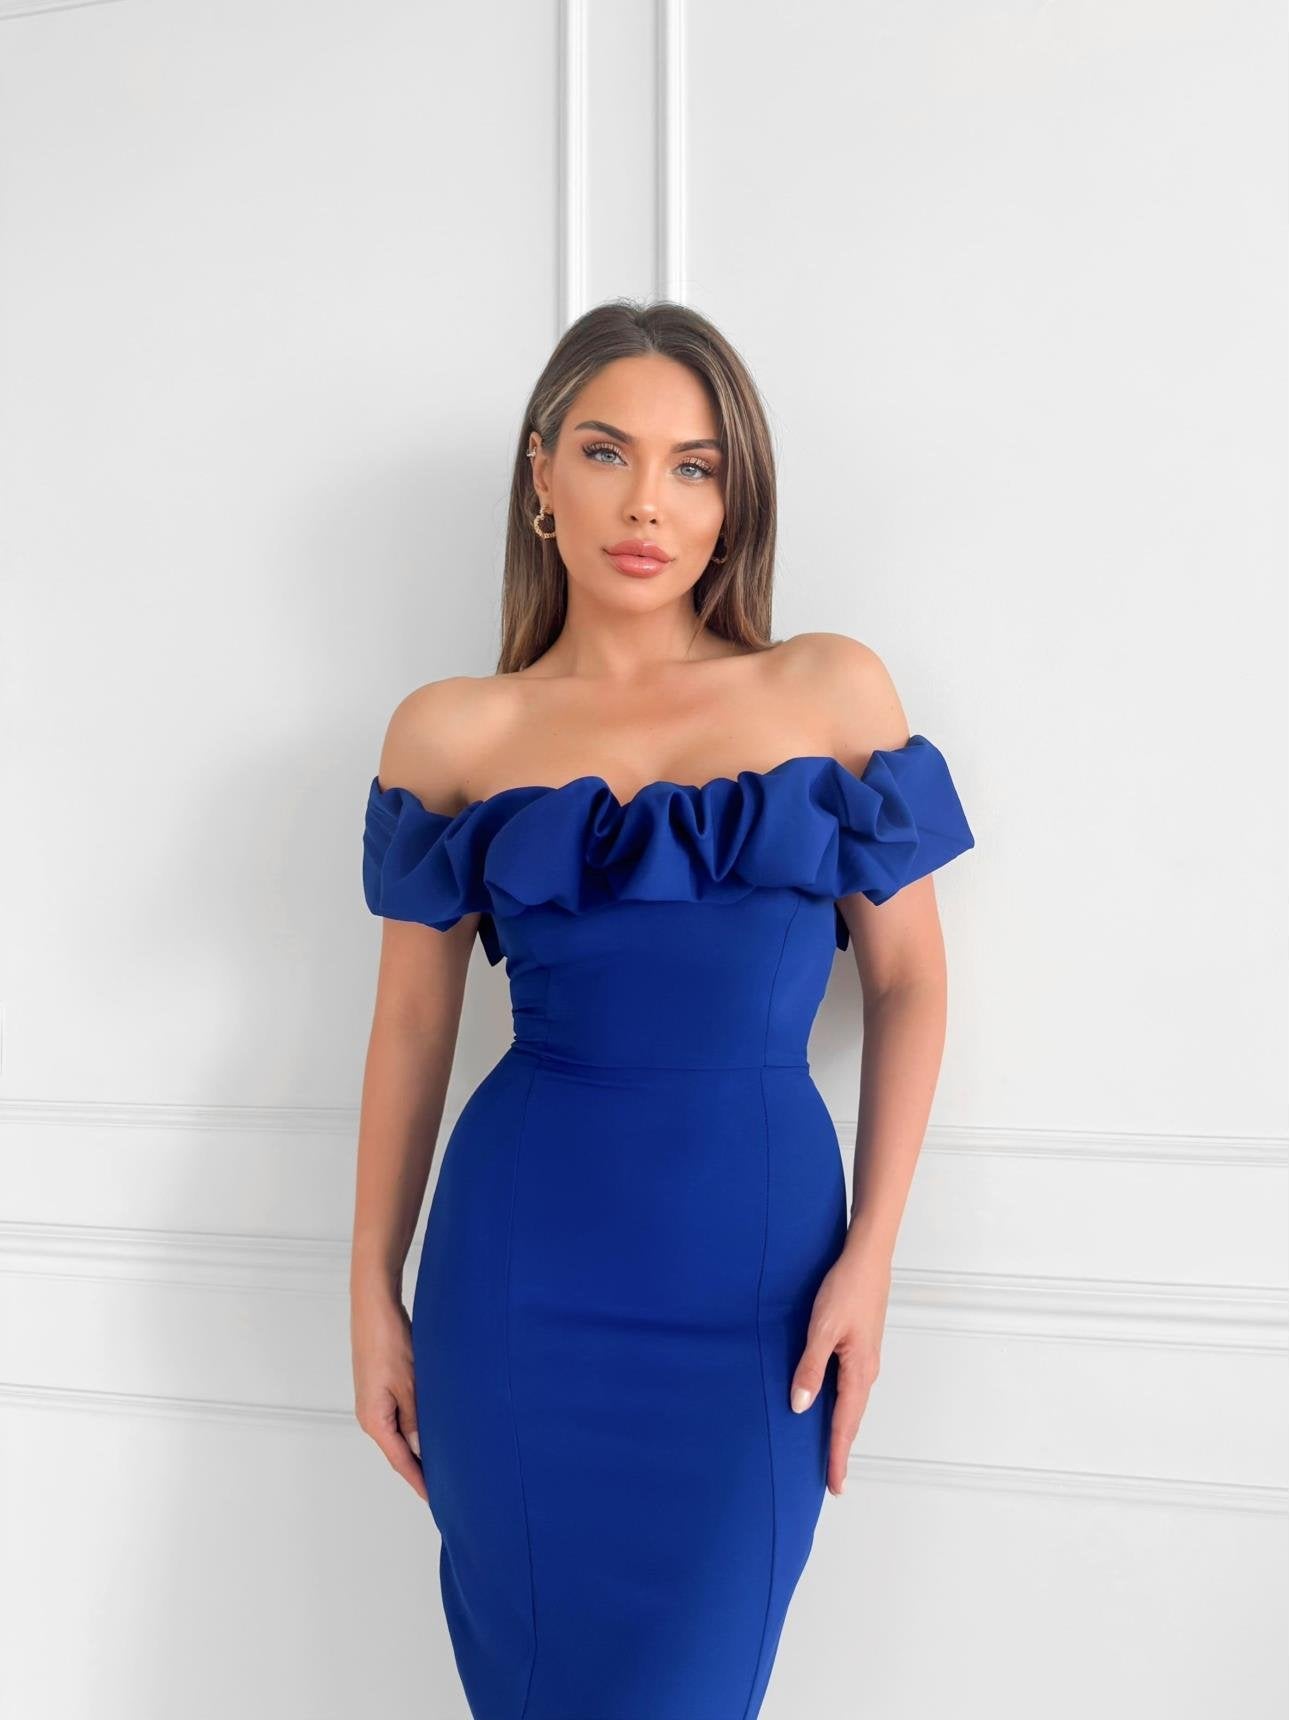 DARK BLUE NECK FRILLY FITTED DRESS